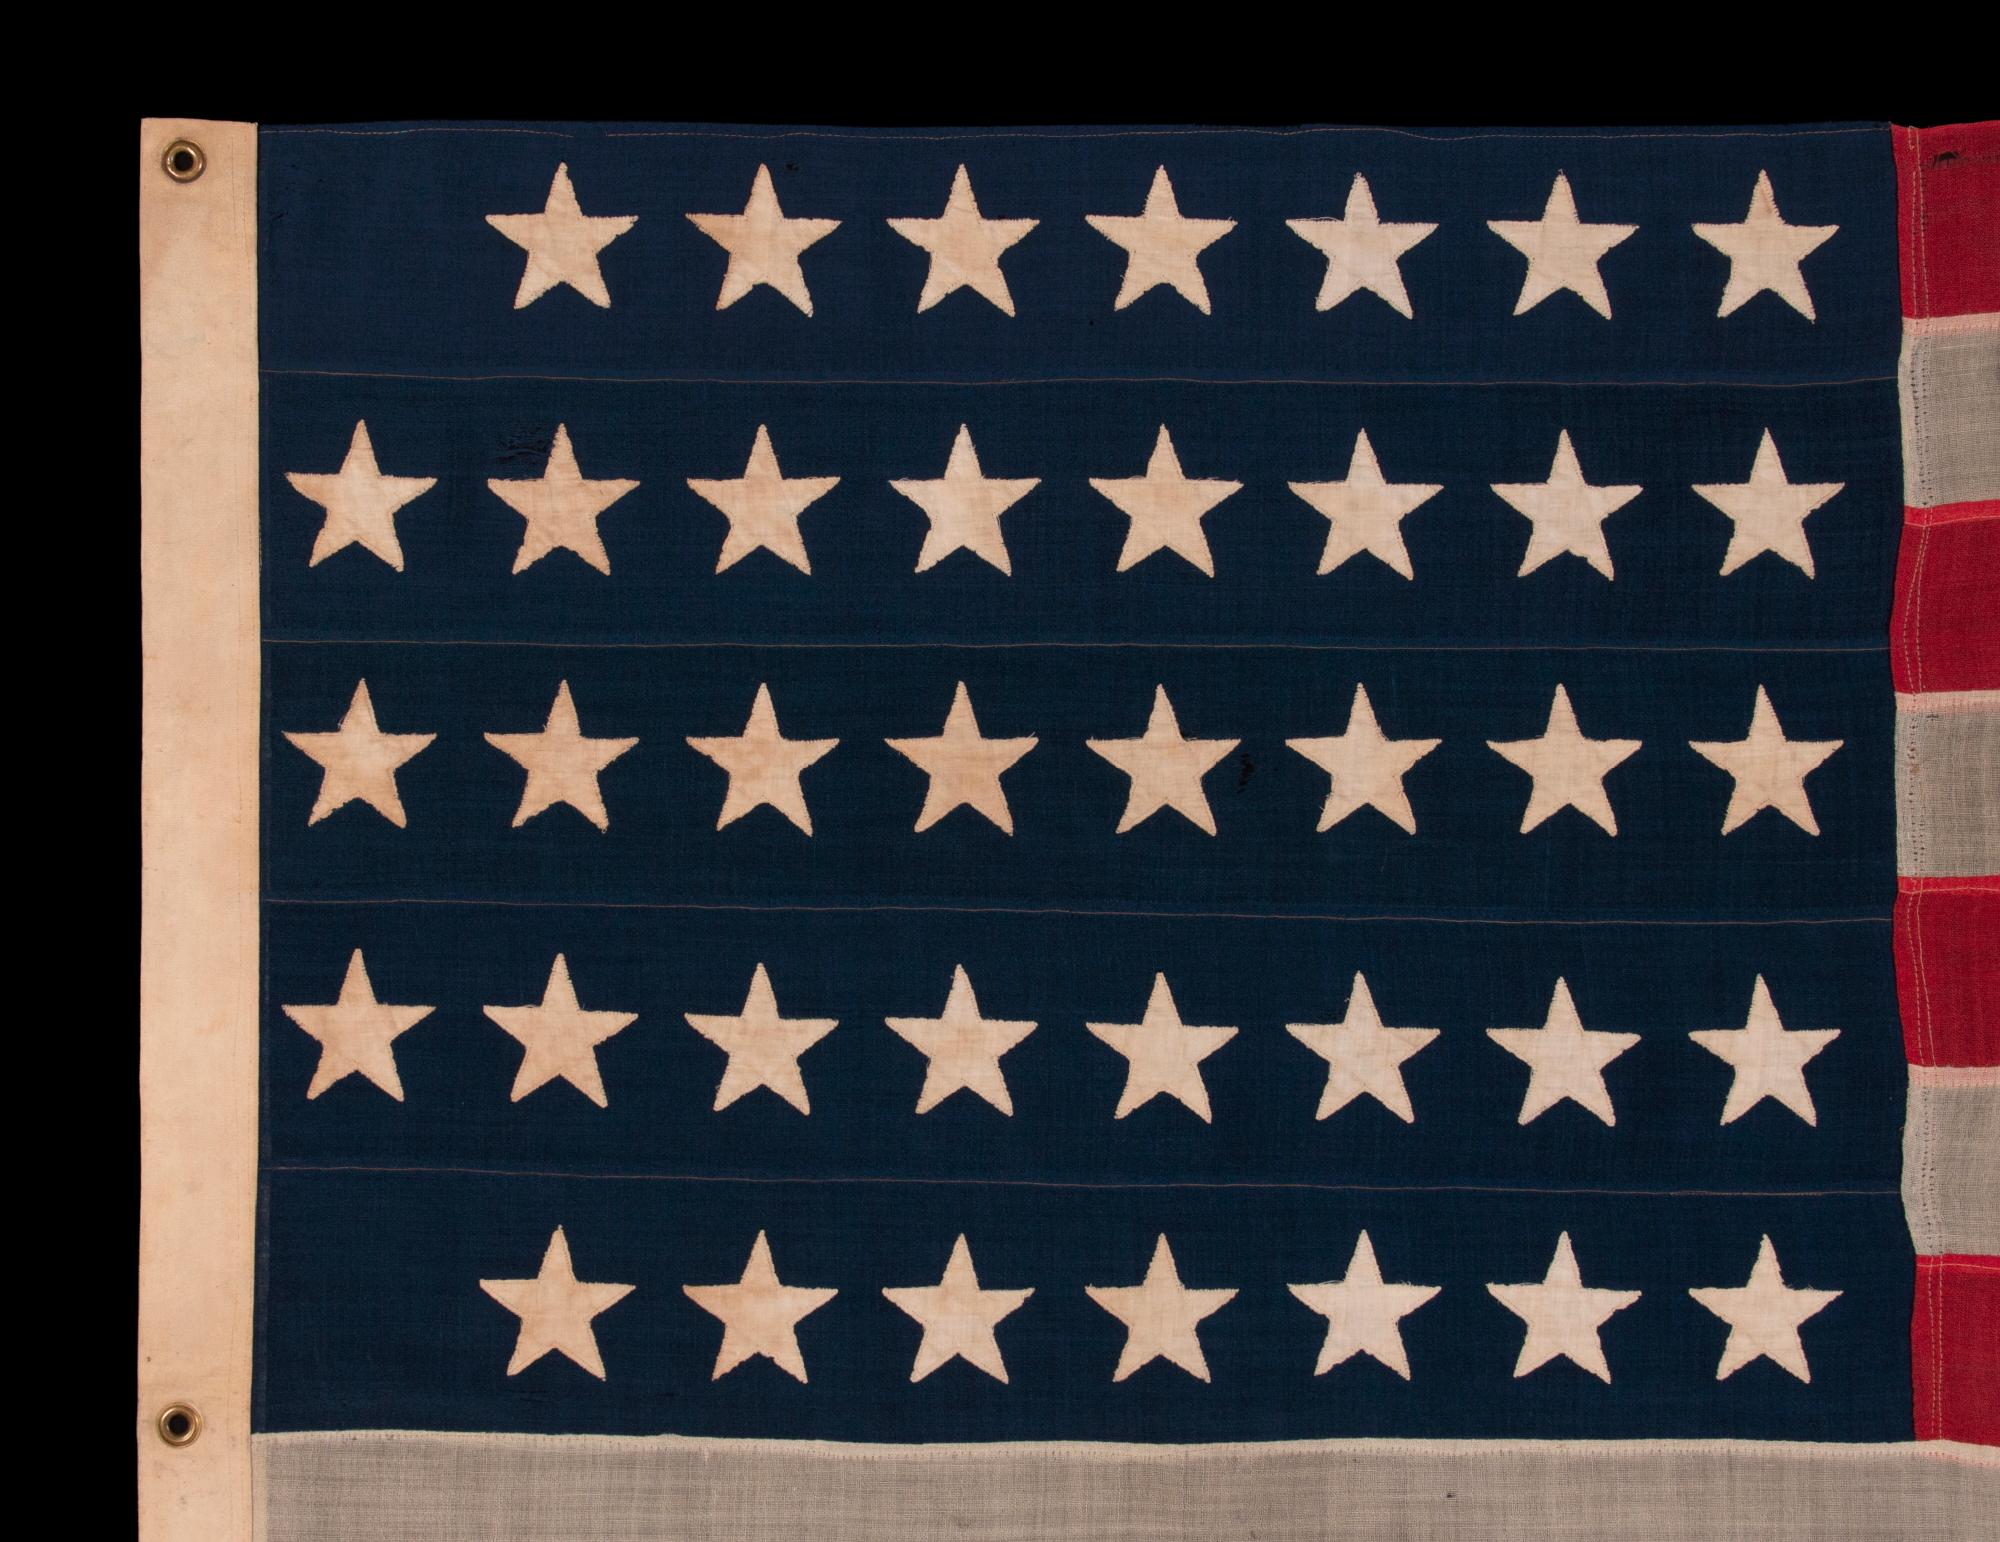 how many stars on the american flag in 1876